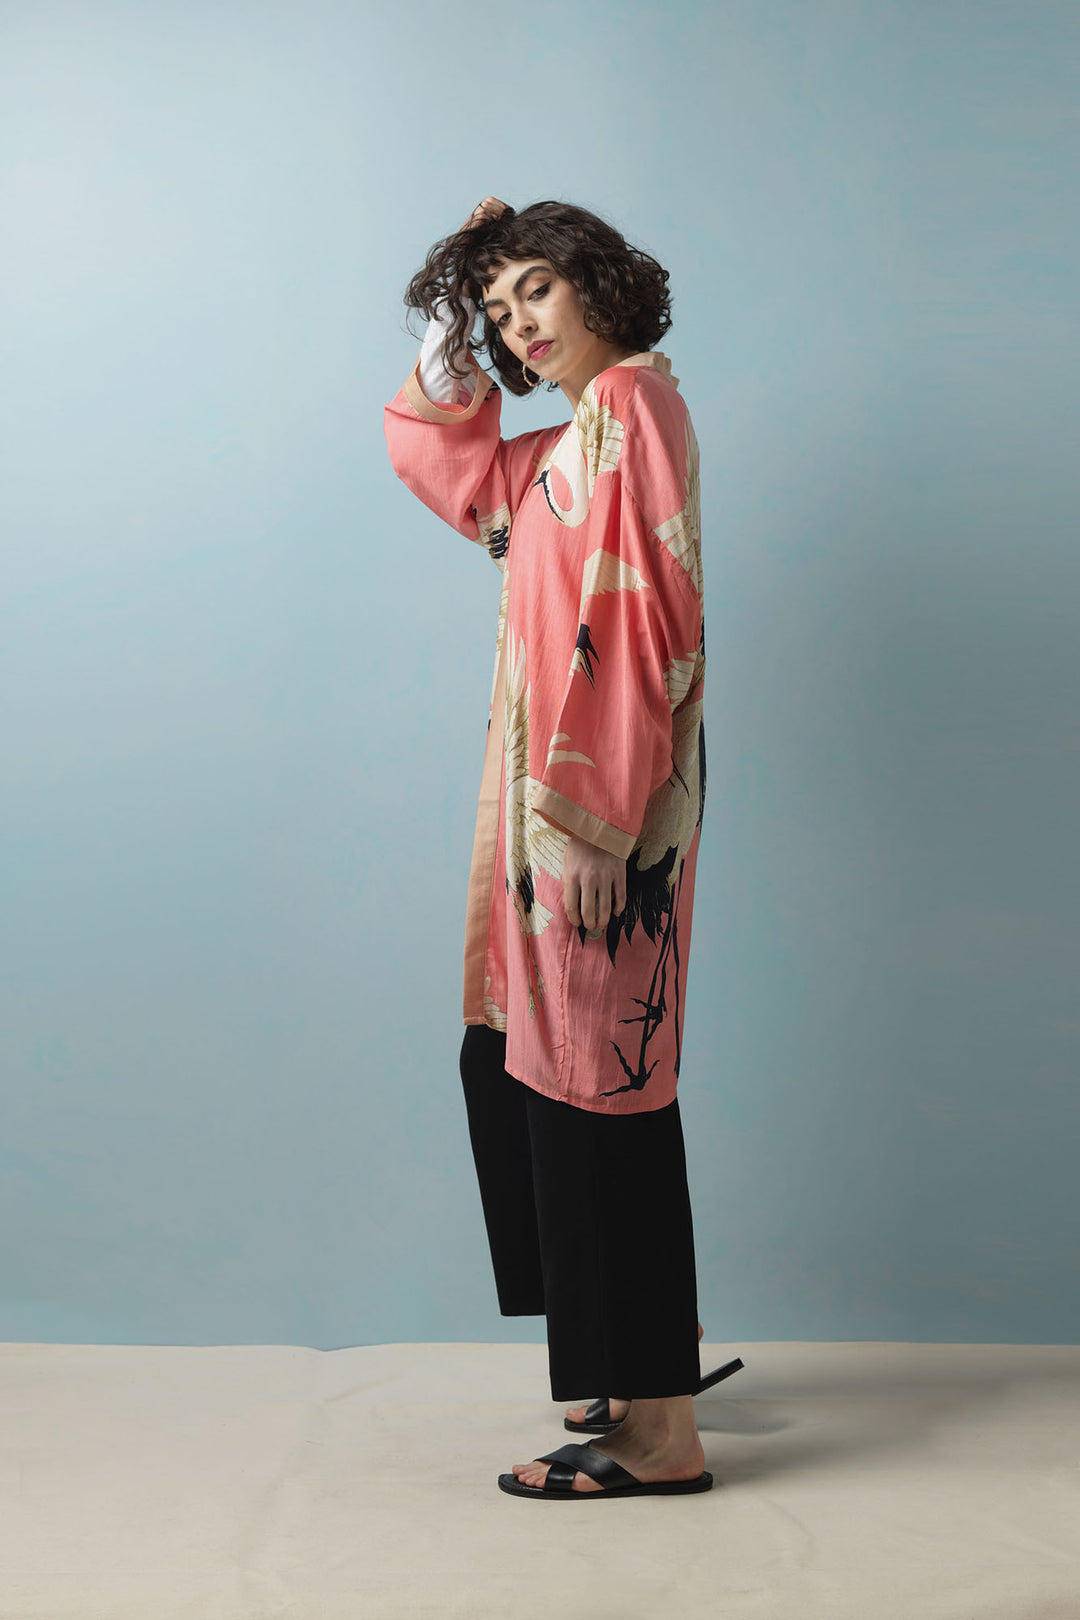 The One Hundred Stars Stork Lipstick Pink mid length collar kimono create a relaxed fit silhouette.